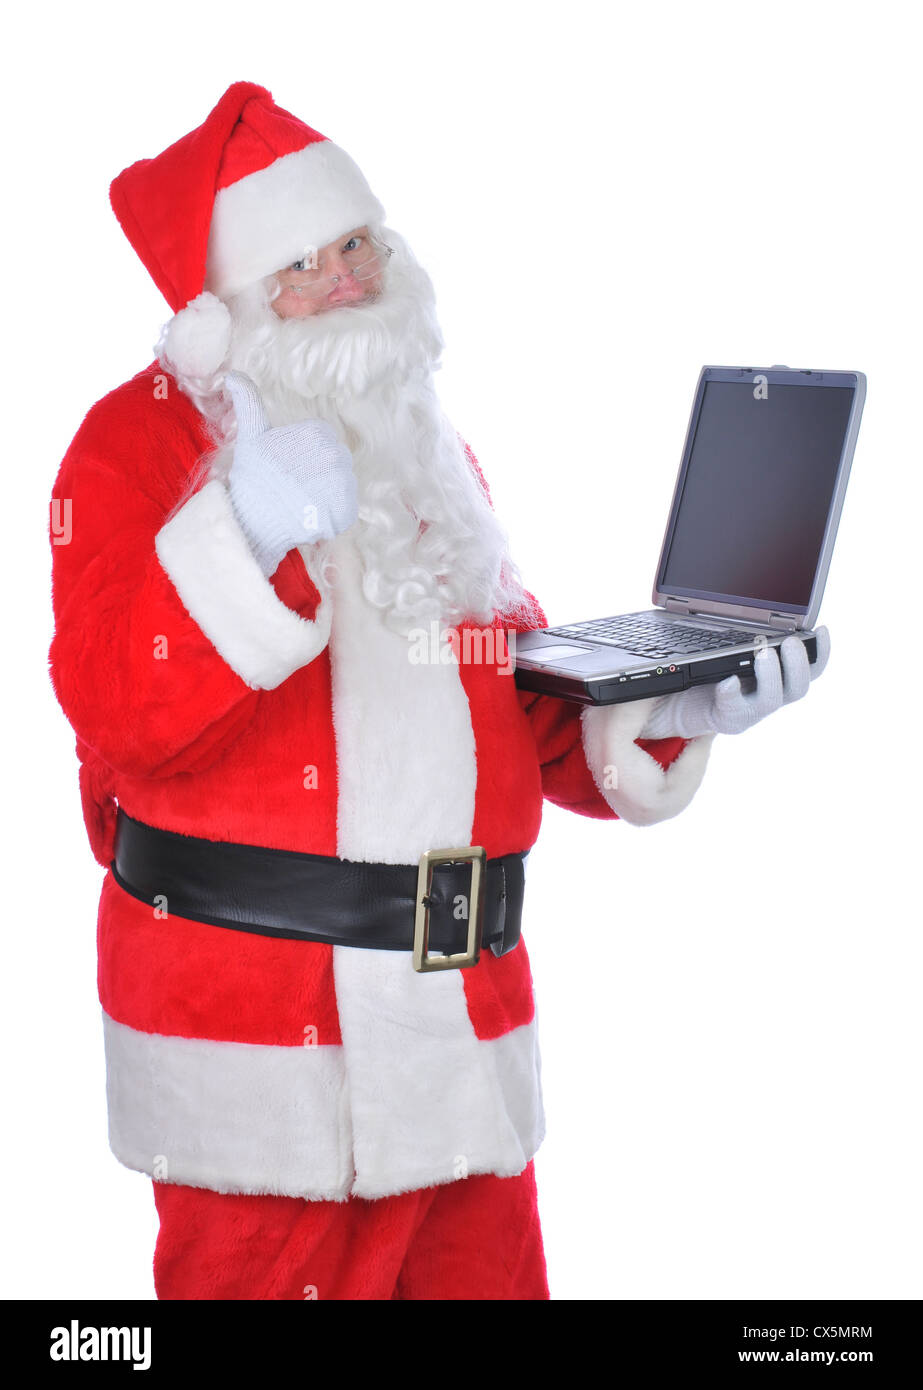 Santa Claus Holding Laptop Giving Thumbs Up sign, isolated over white Stock Photo